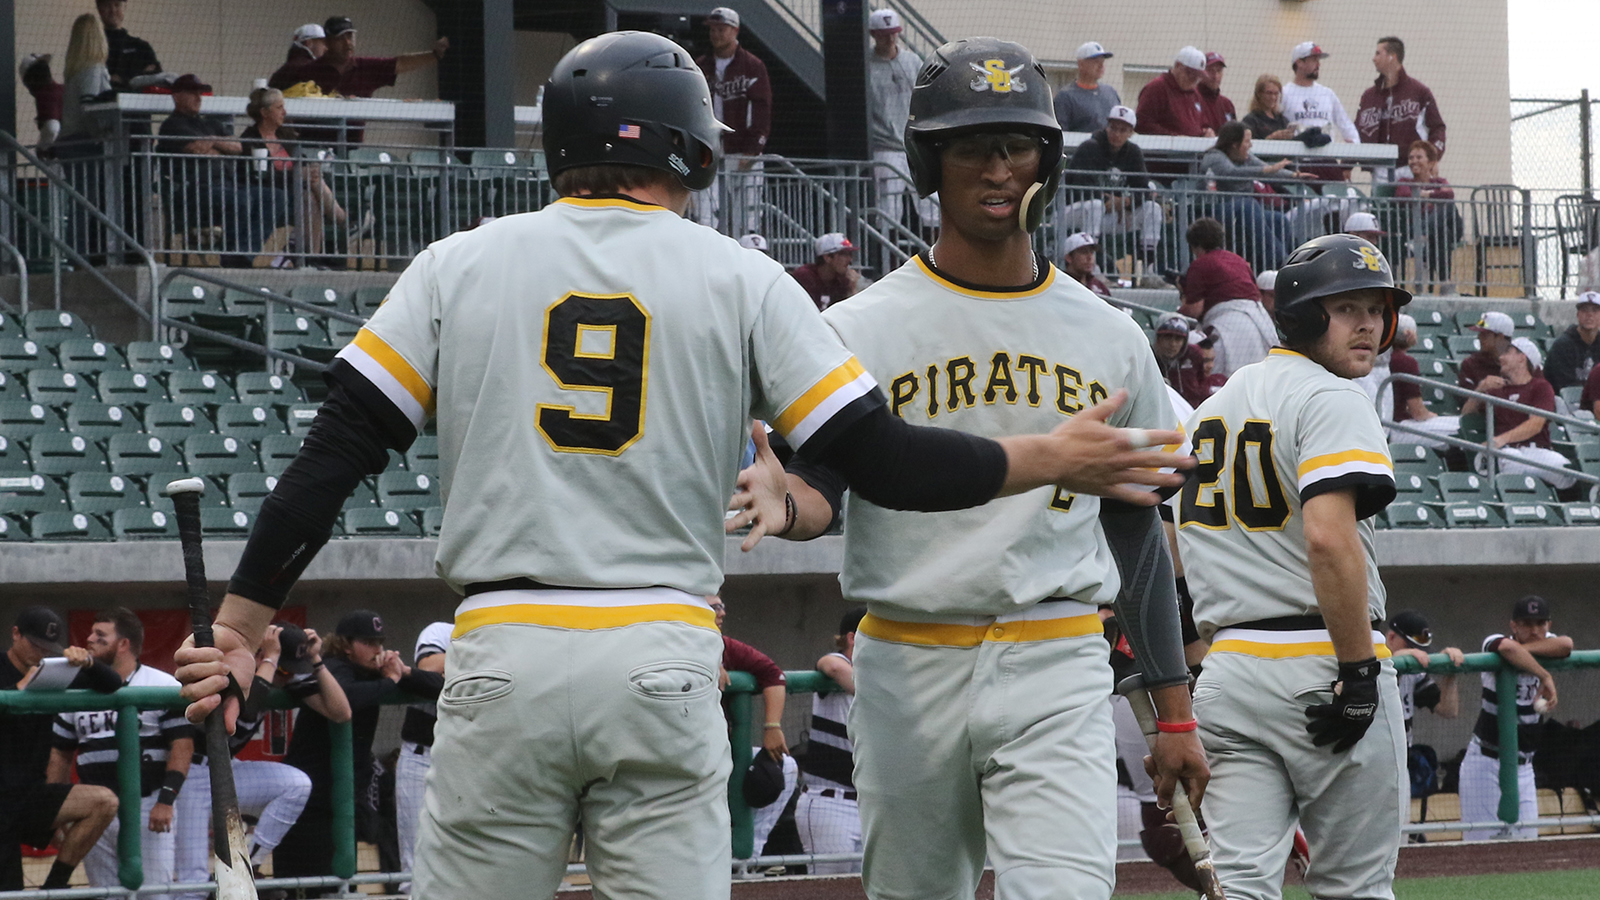 Pirates Knock Off Top-Seeded Centenary in Opening Game of SCAC Championship